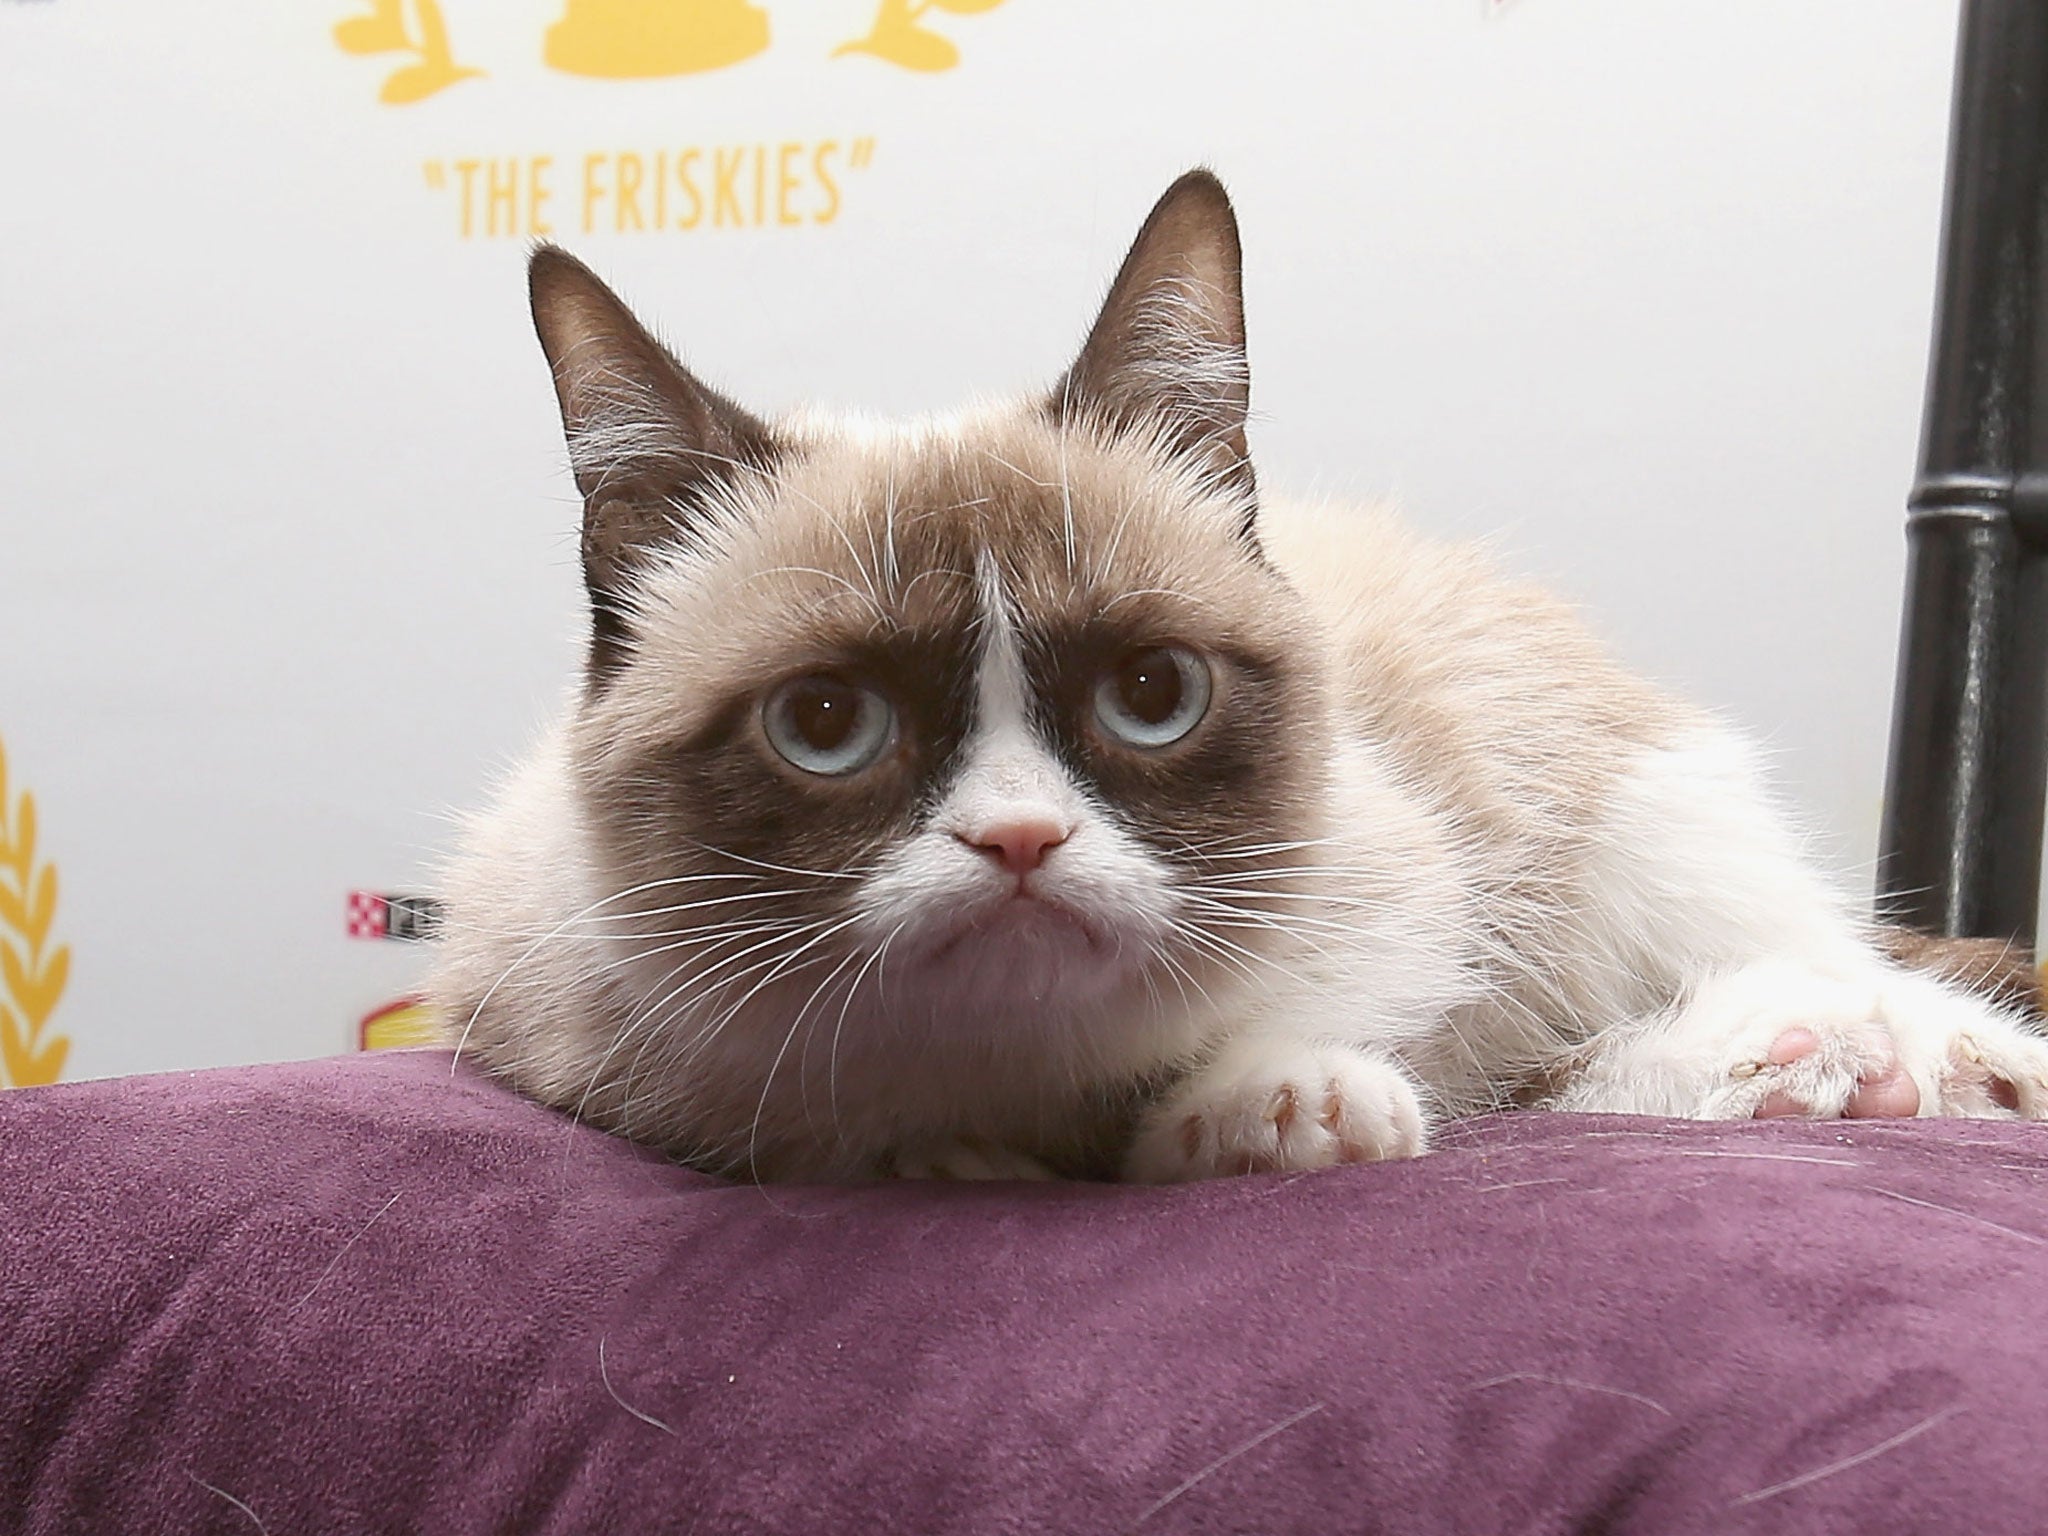 Grumpy Cat attends The Friskies 2013 at Arena NYC on October 15, 2013 in New York City.